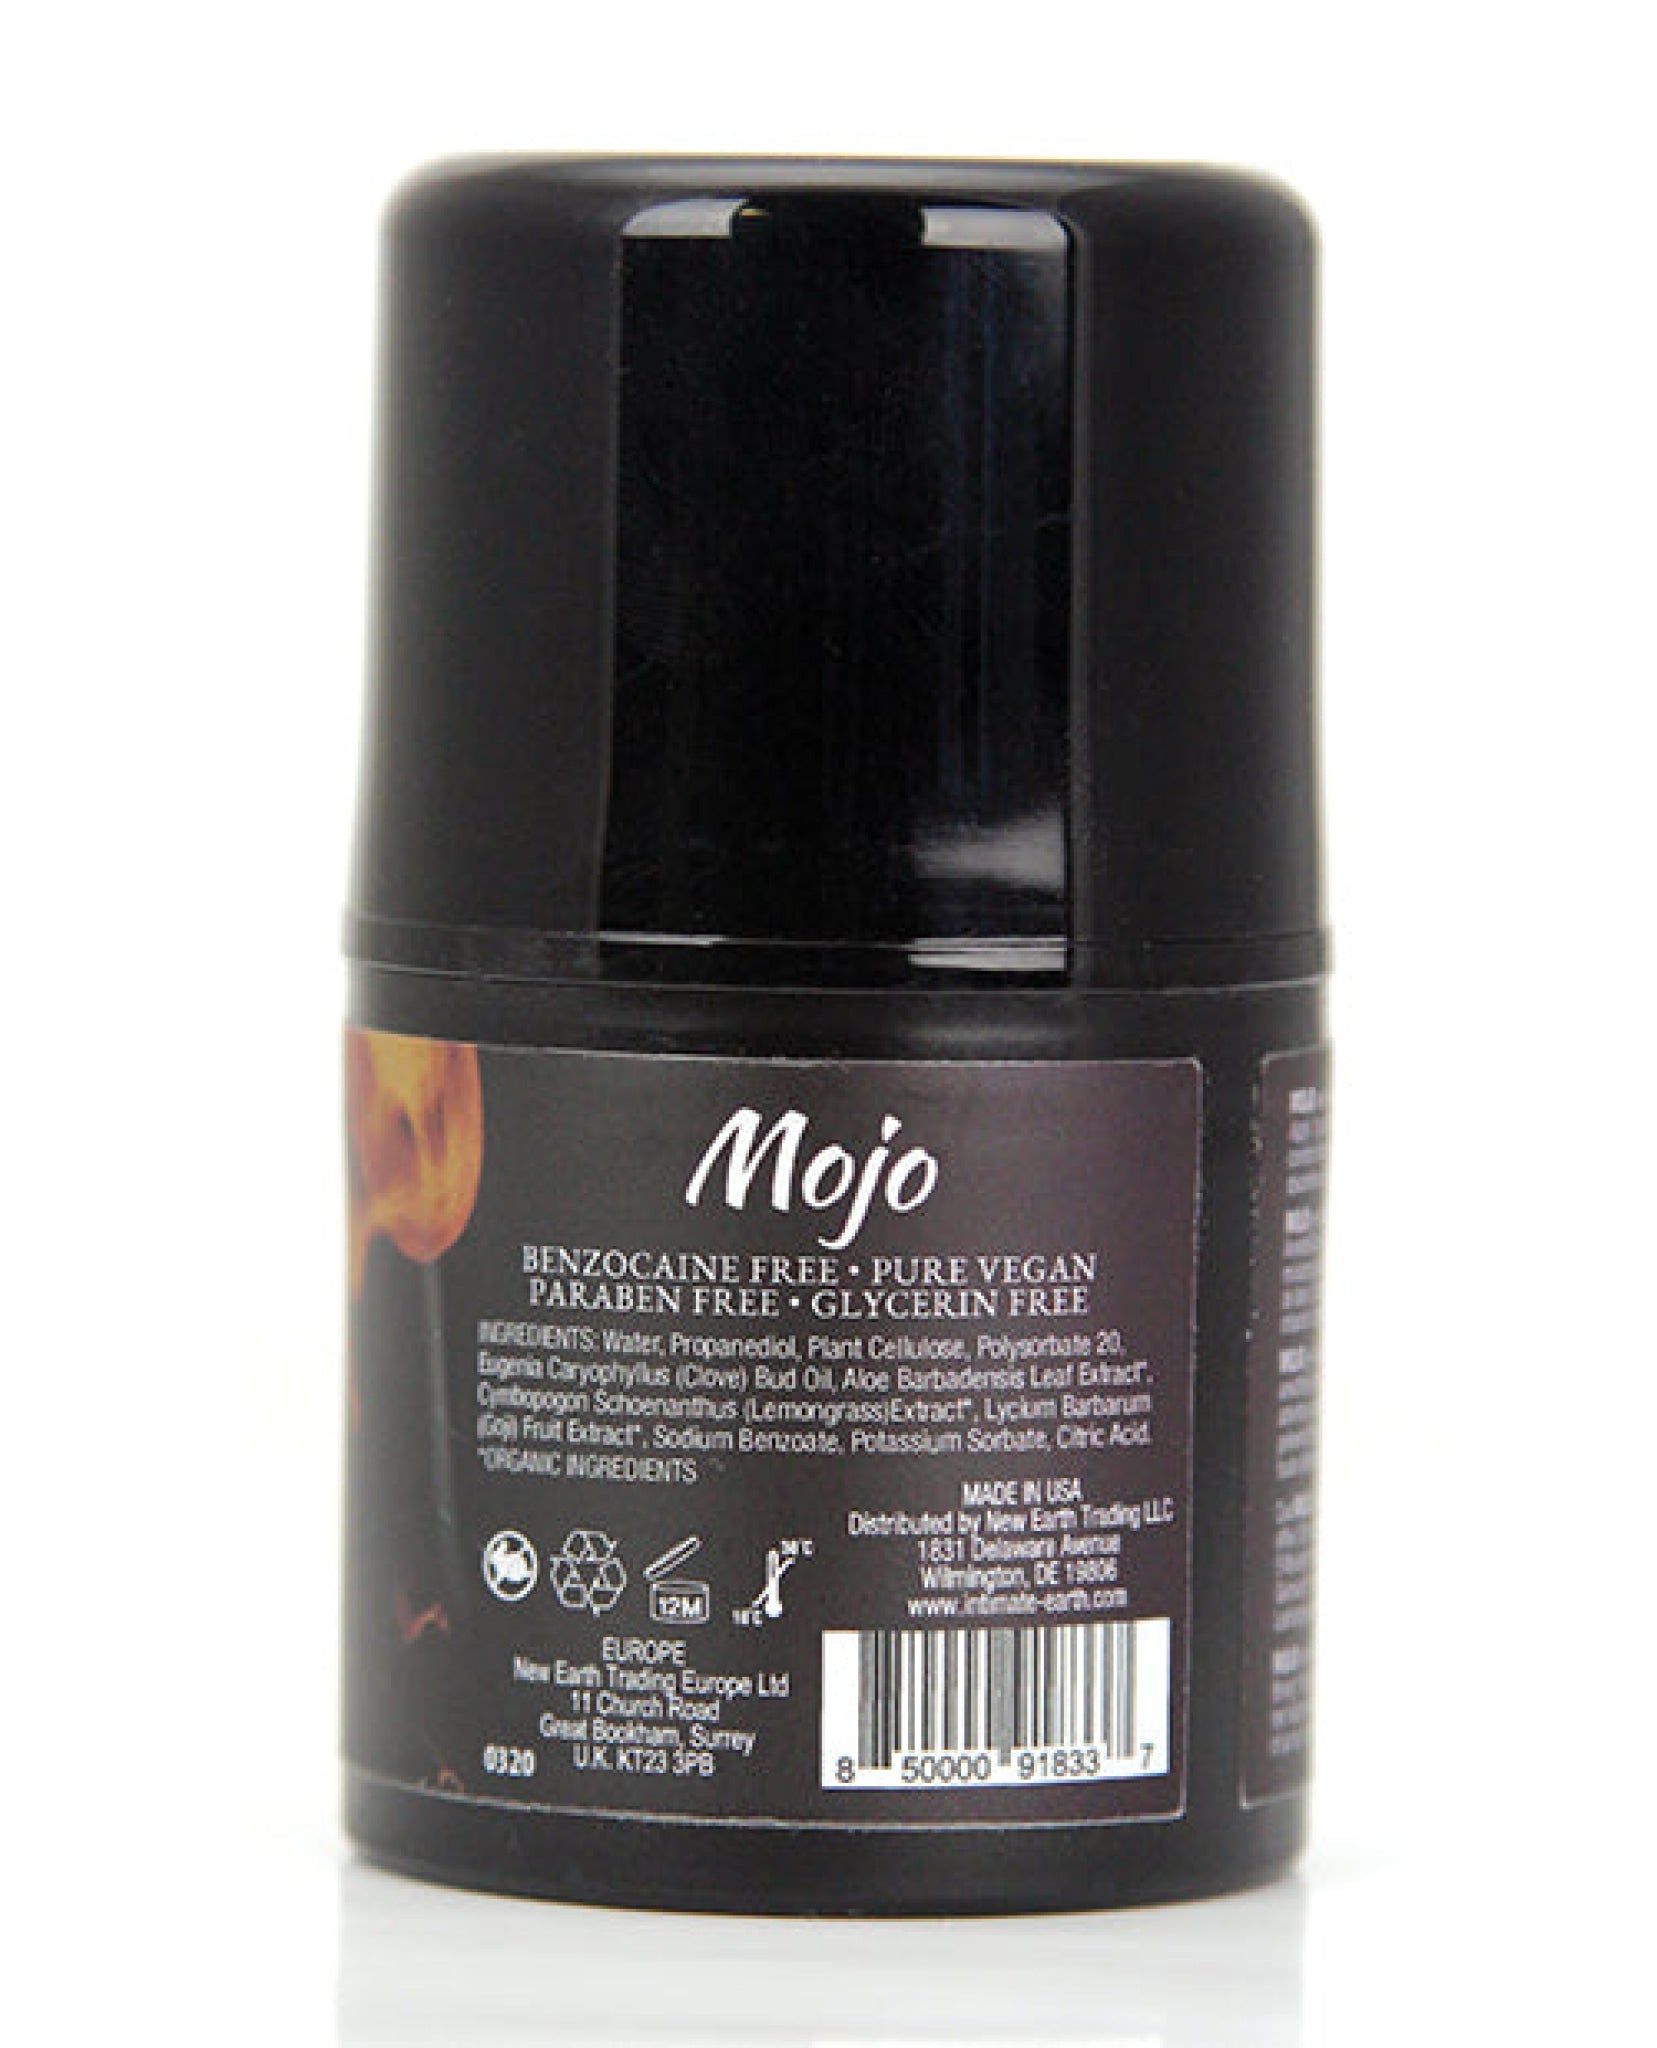 Intimate Earth Mojo Clove Anal Relaxing Gel - 1 Oz Intimate Earth